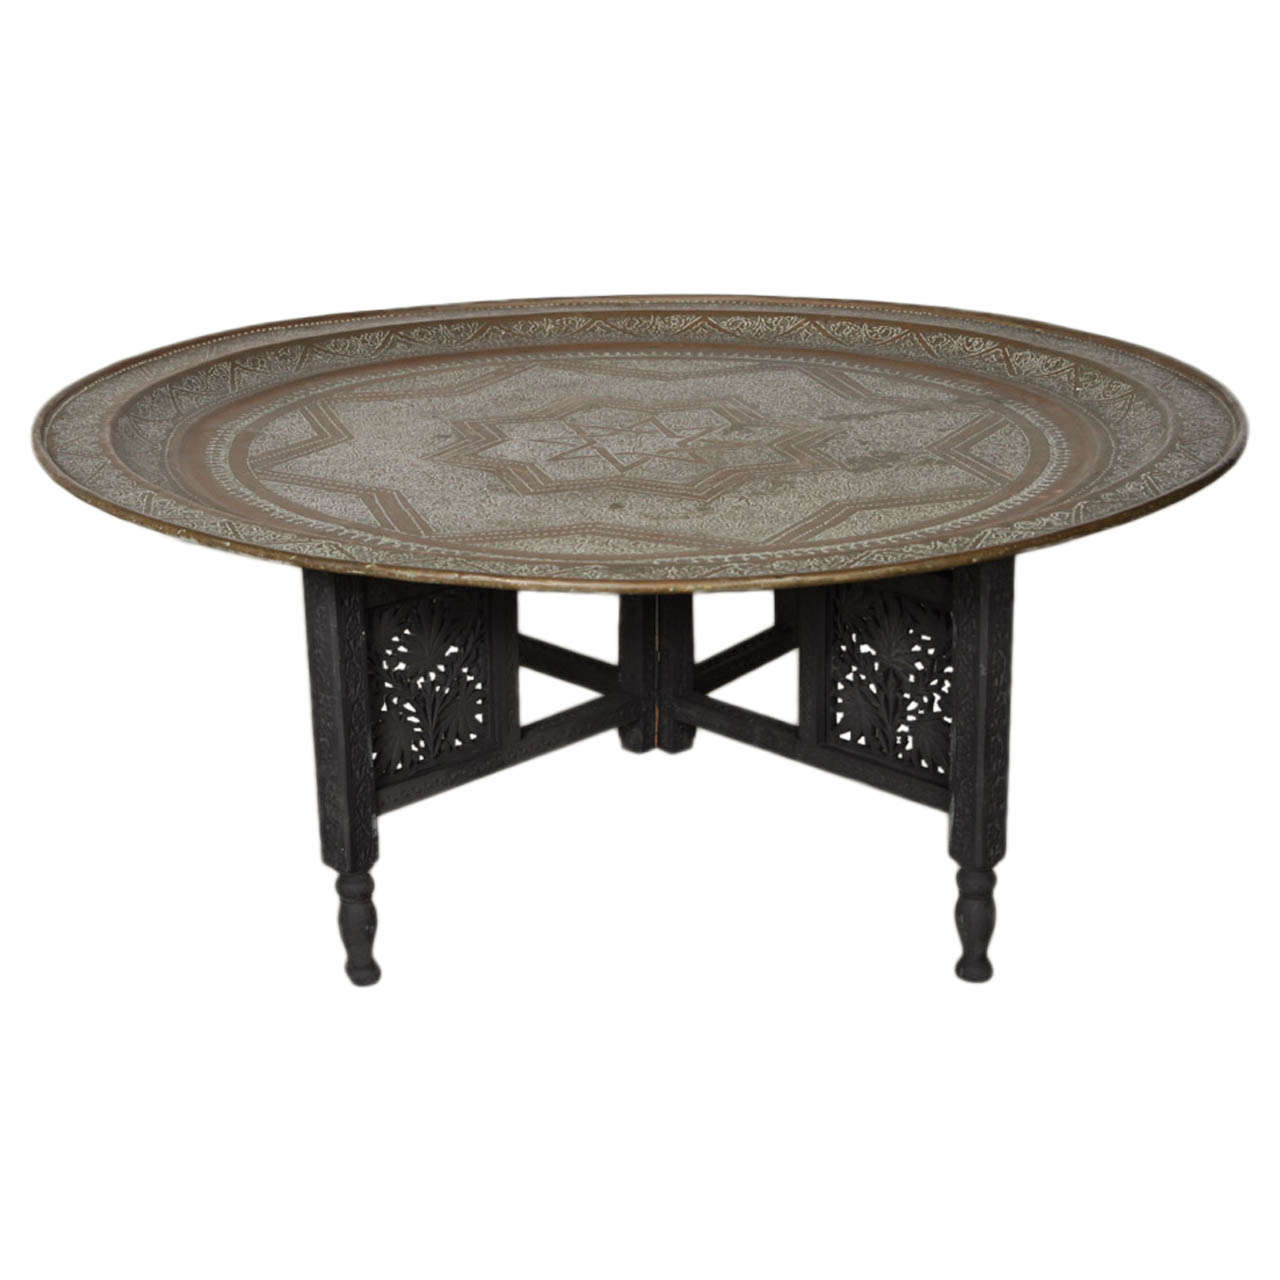 Moroccan Round Brass Tray Coffee Table At 1stdibs